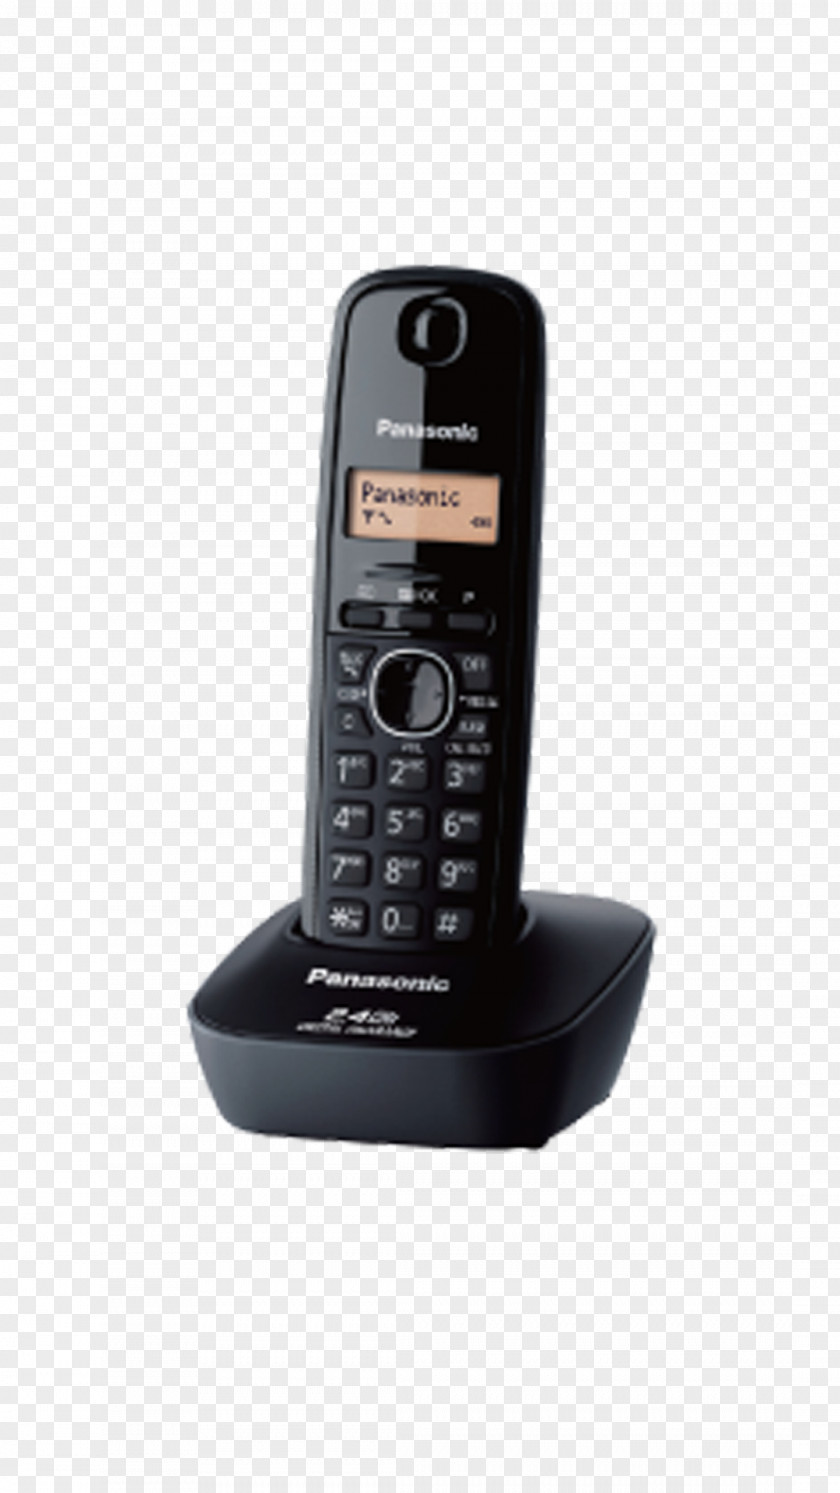 Supermarket Promotions Cordless Telephone Digital Enhanced Telecommunications Home & Business Phones Mobile PNG